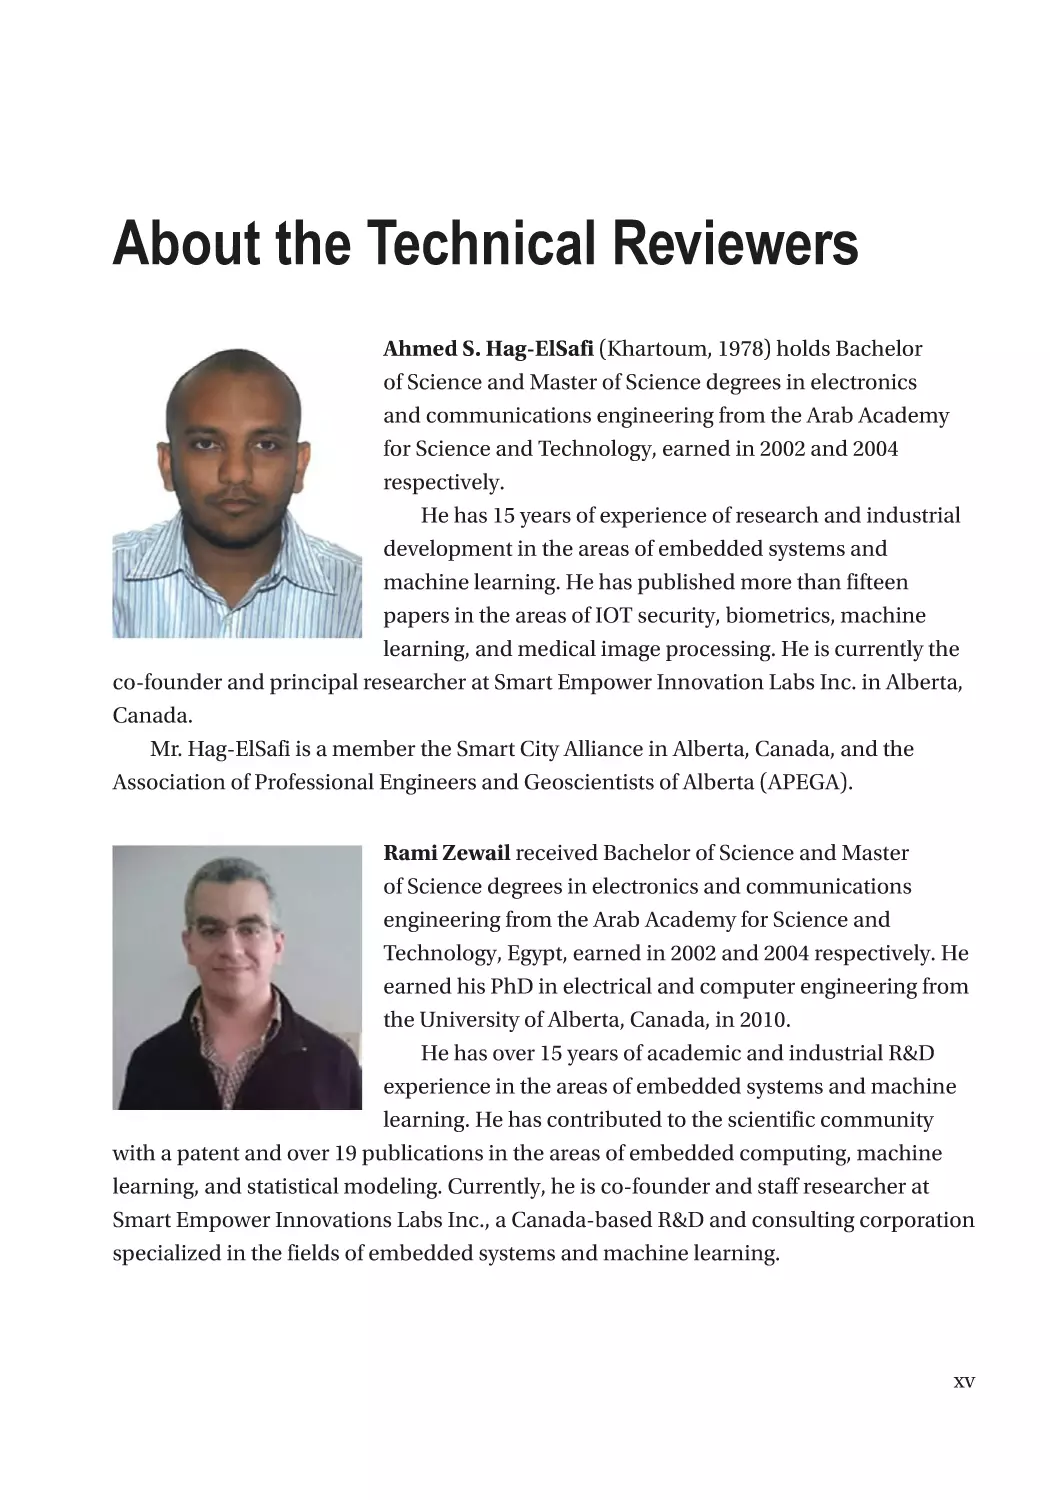 About the Technical Reviewers